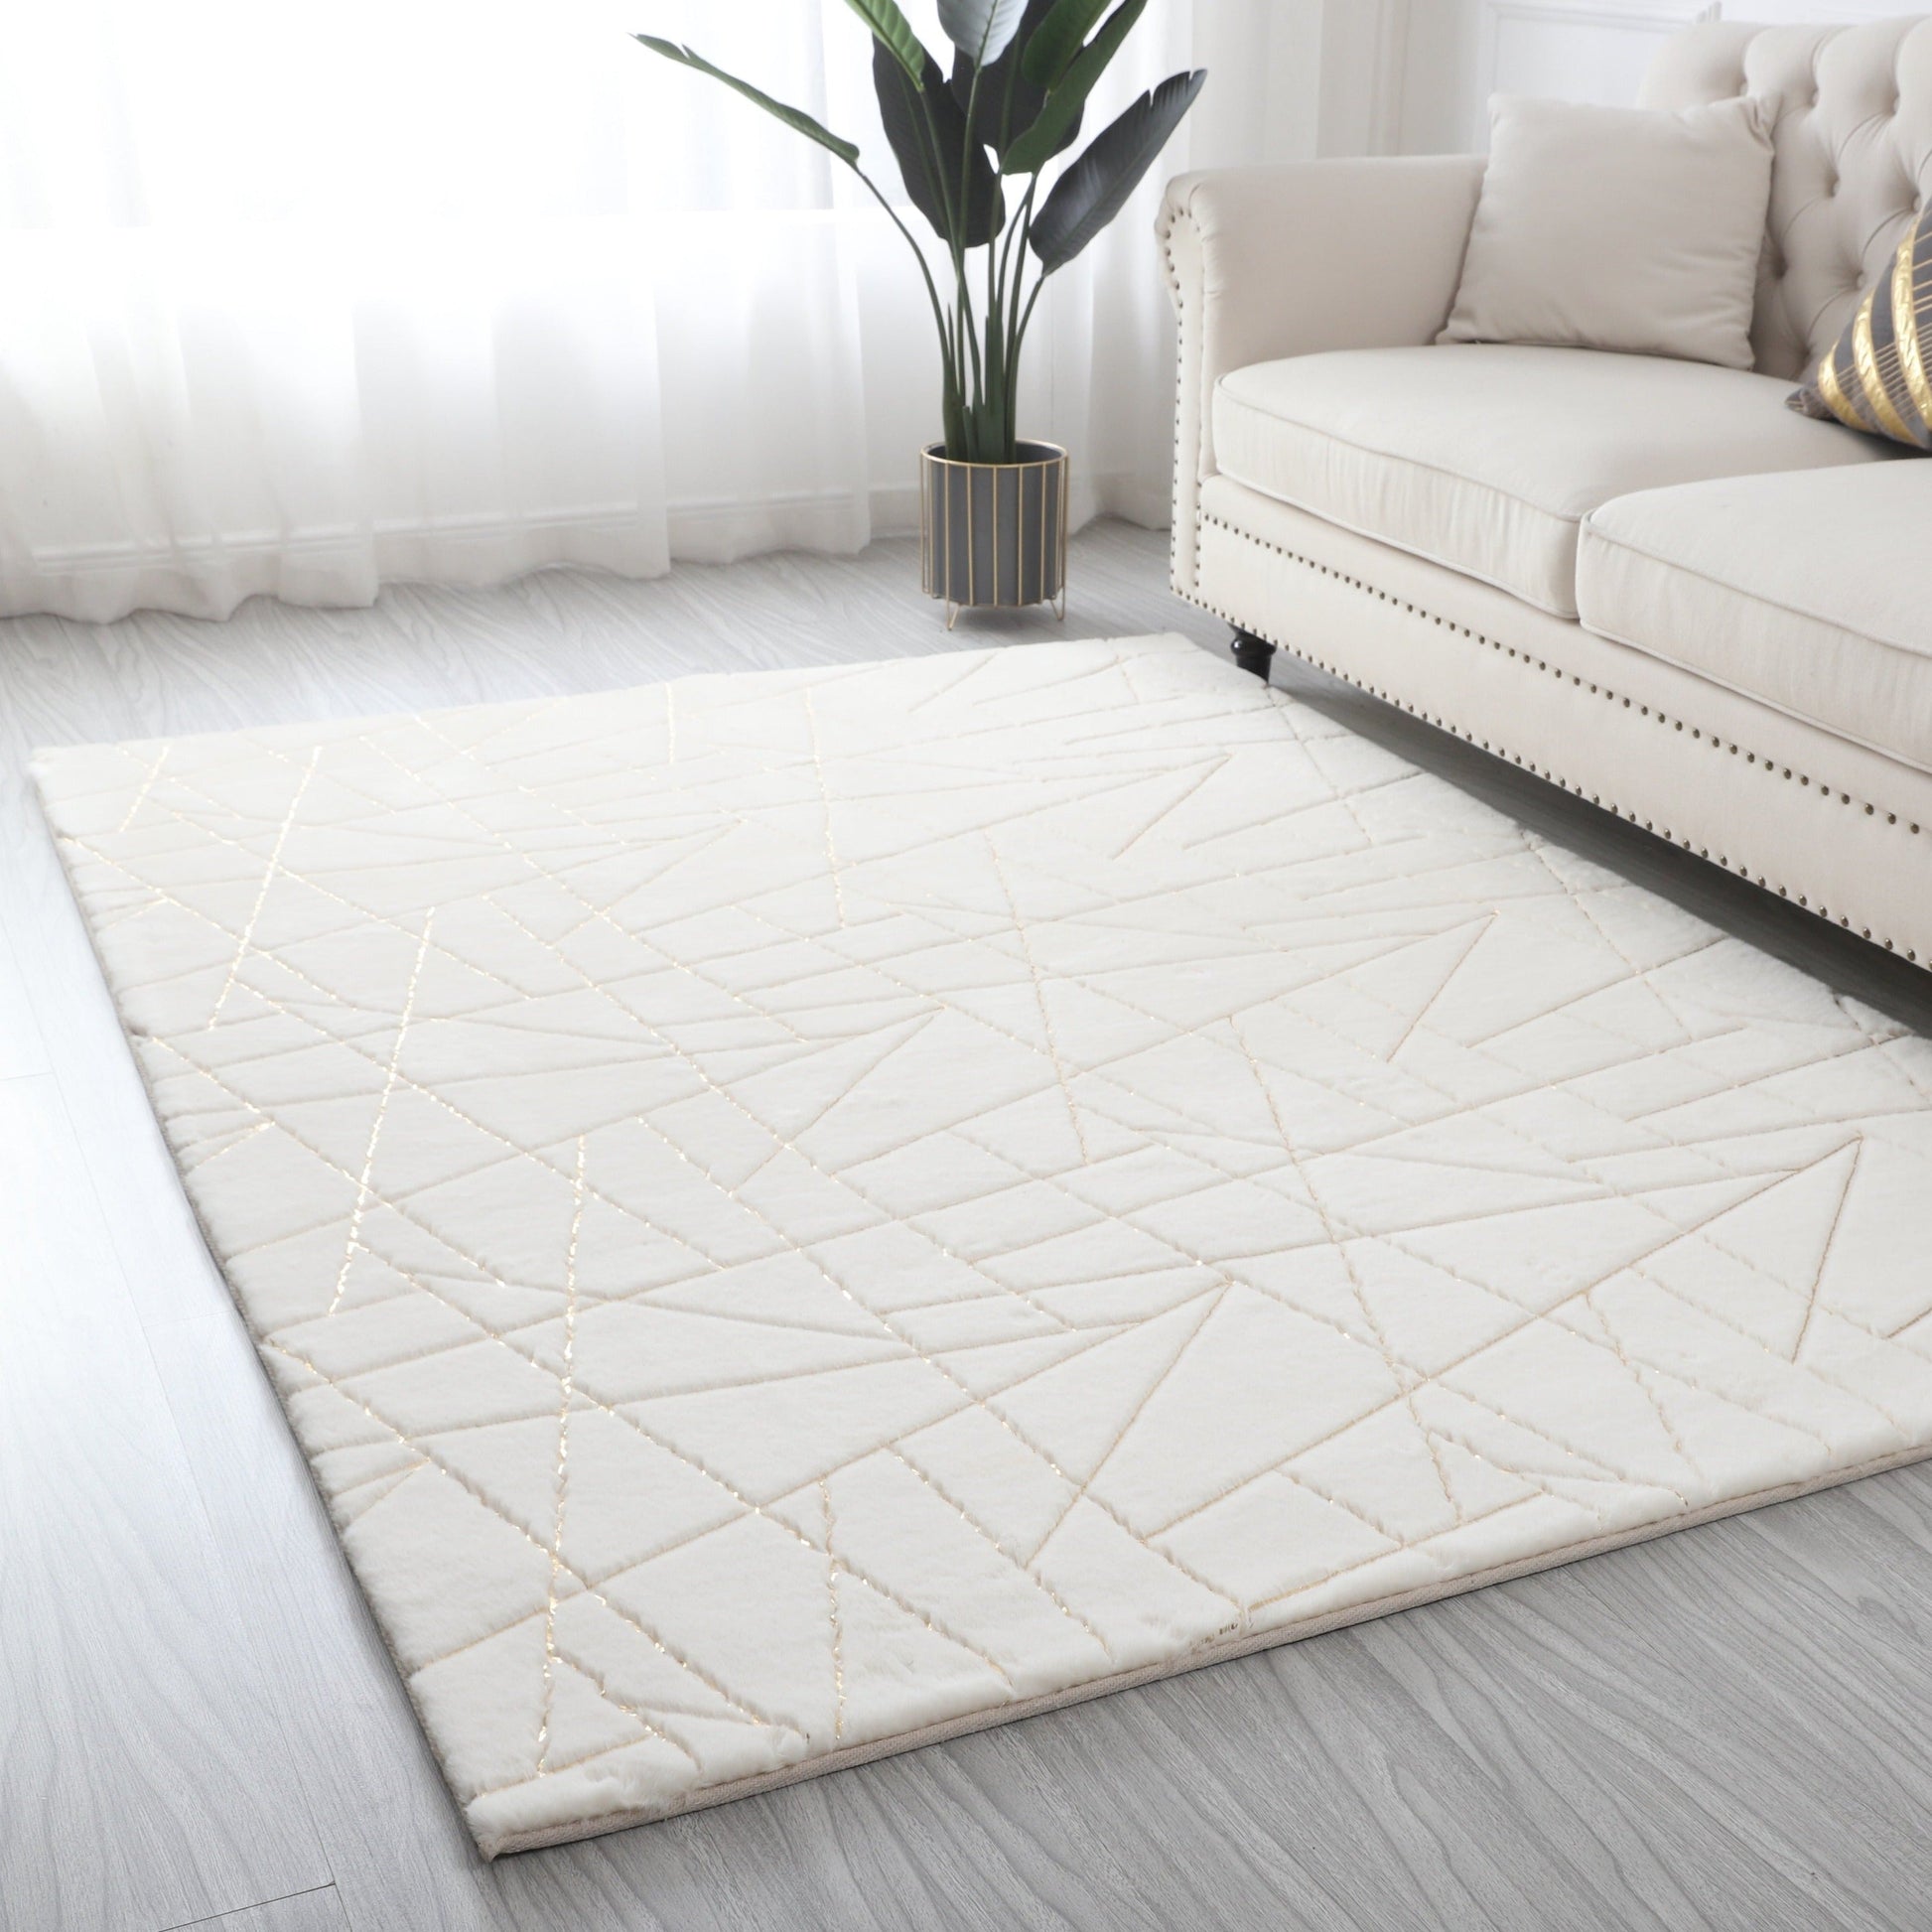 Golden White Lines Shimmery Soft Cozy Fuzzy Faux Fur Area Rug/Carpet